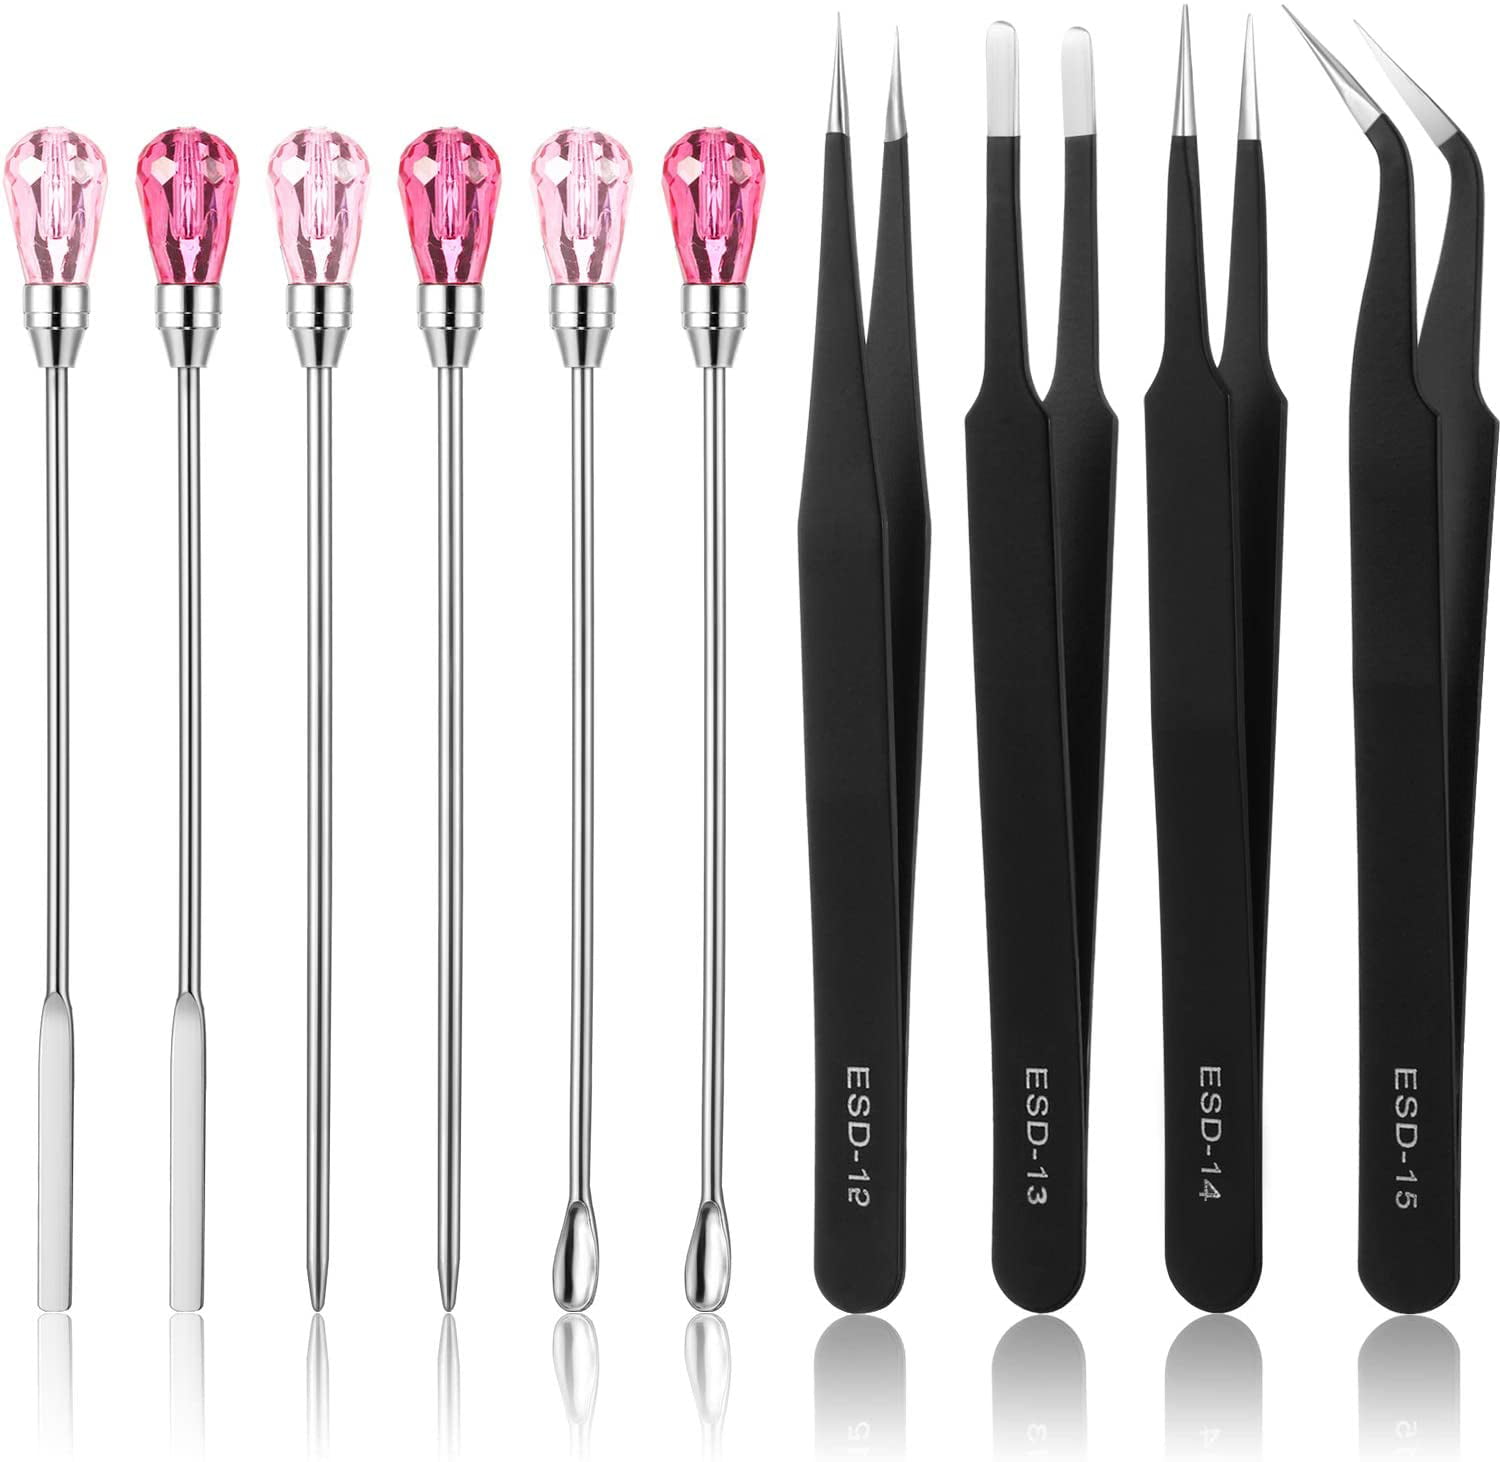 Anti-Static Stainless Precision Steel ESD Tweezers Set for Jewelry Making DIY Resin Craft Casting Molds 11 Pcs Silicone Resin Mold Tool Set Stirring Needle Spoon Tool Jewelry Making Kit